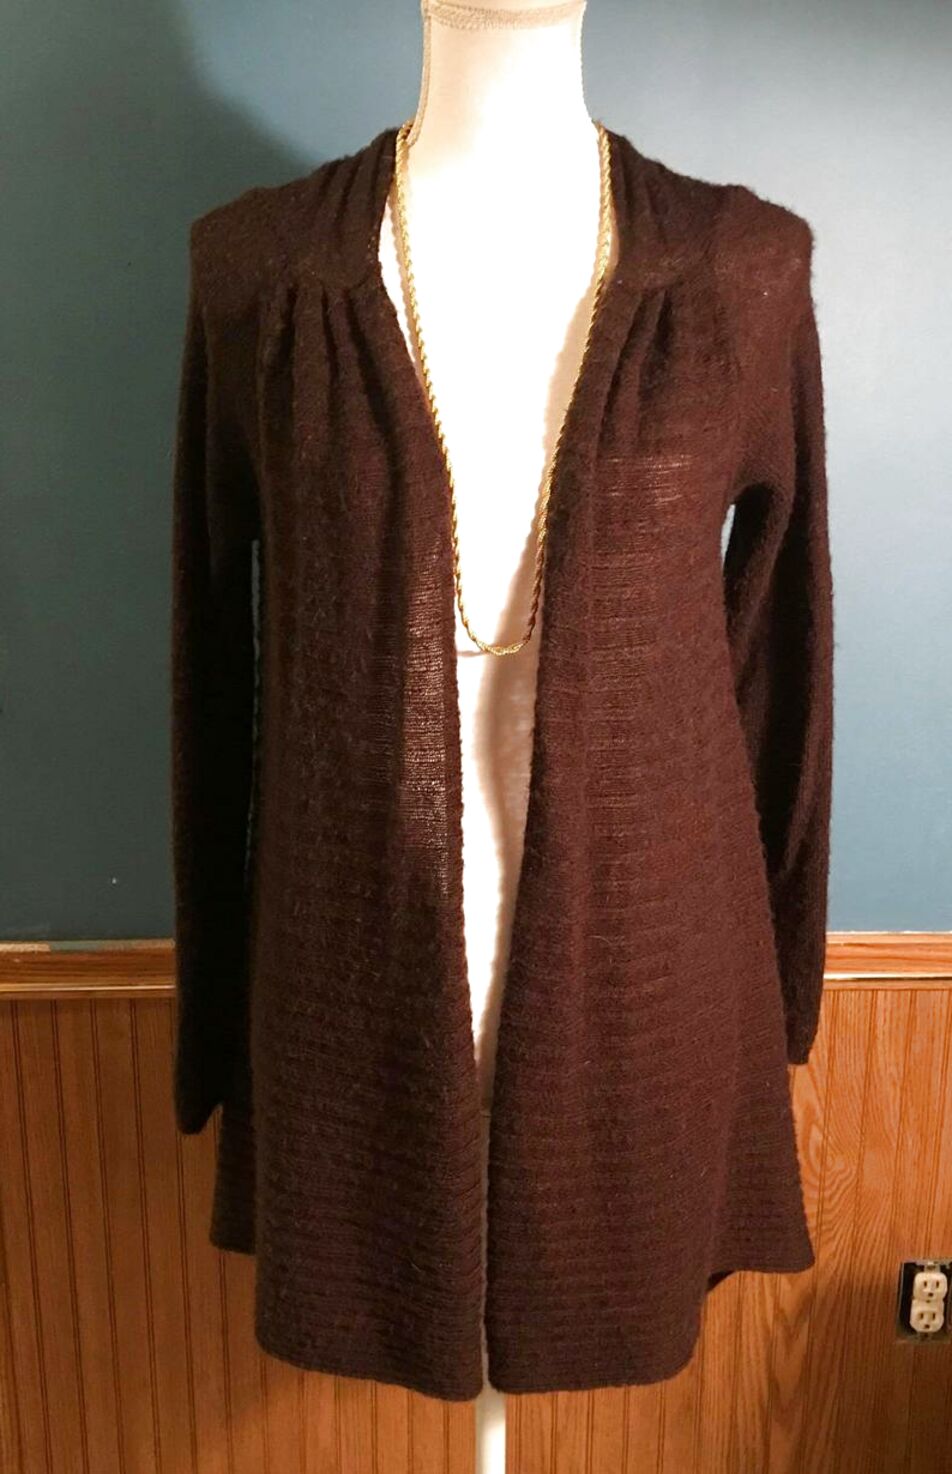 Chocolate Brown Cardigan for sale in UK | 70 used Chocolate Brown Cardigans